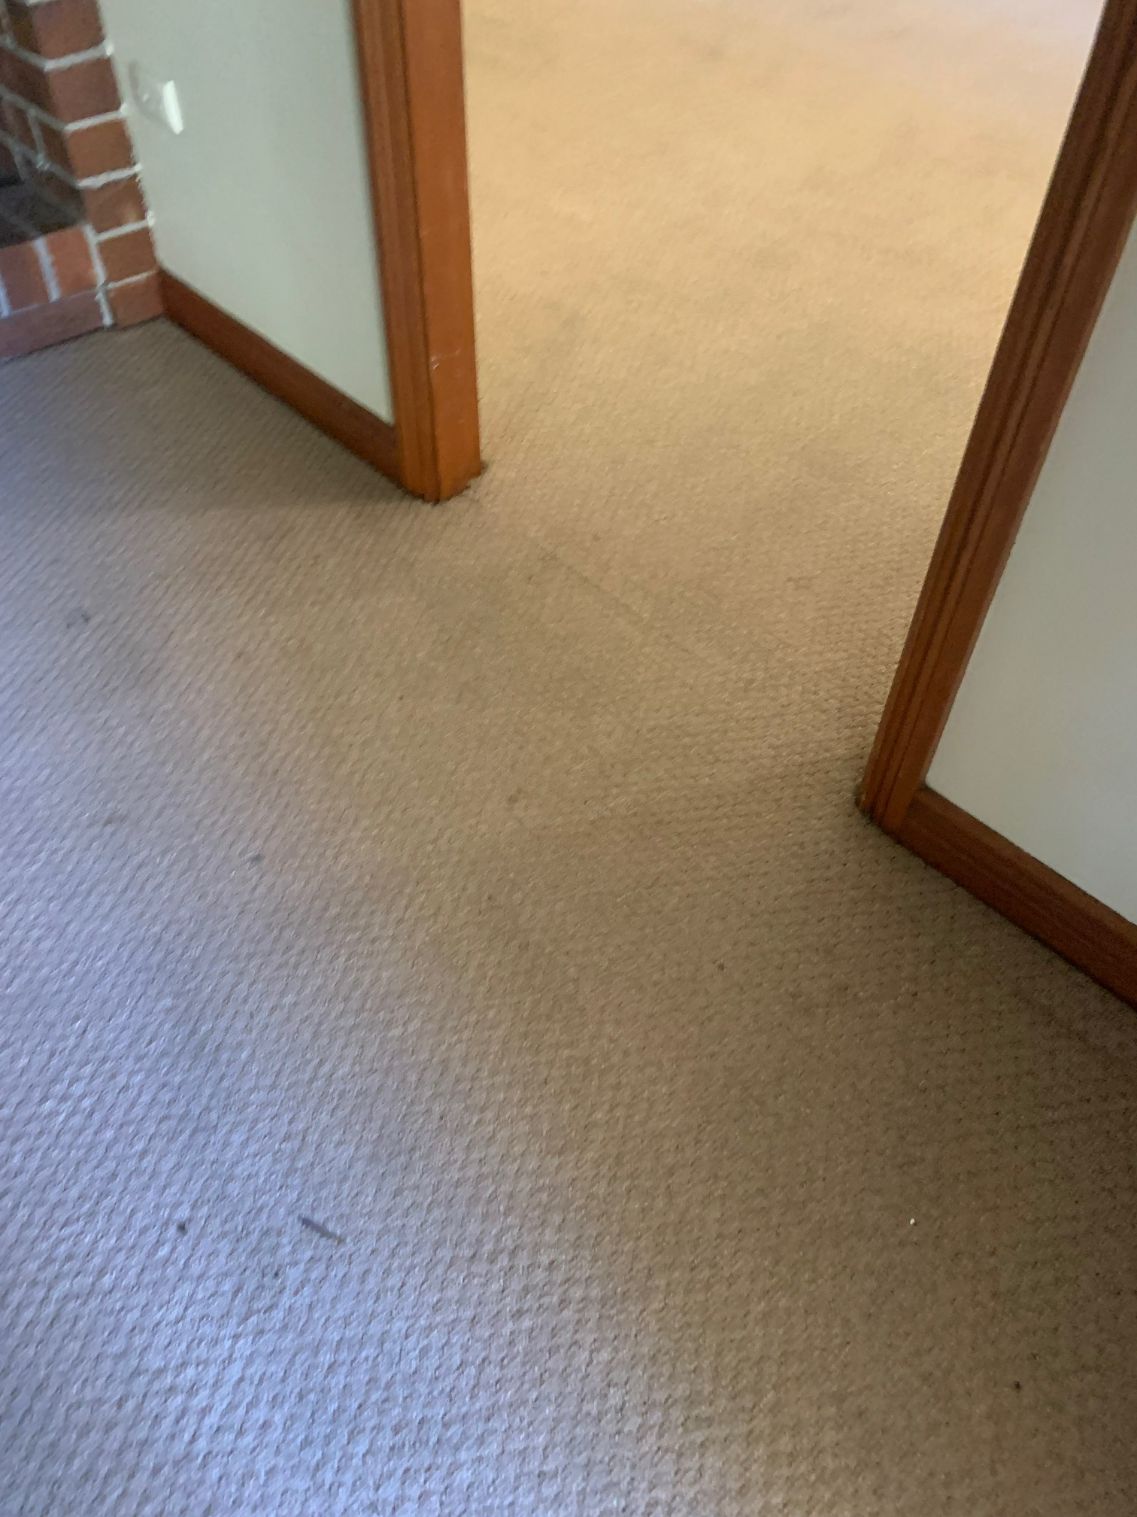 After Cleaning The Carpet — Carpet Cleaning in Wollongong, NSW